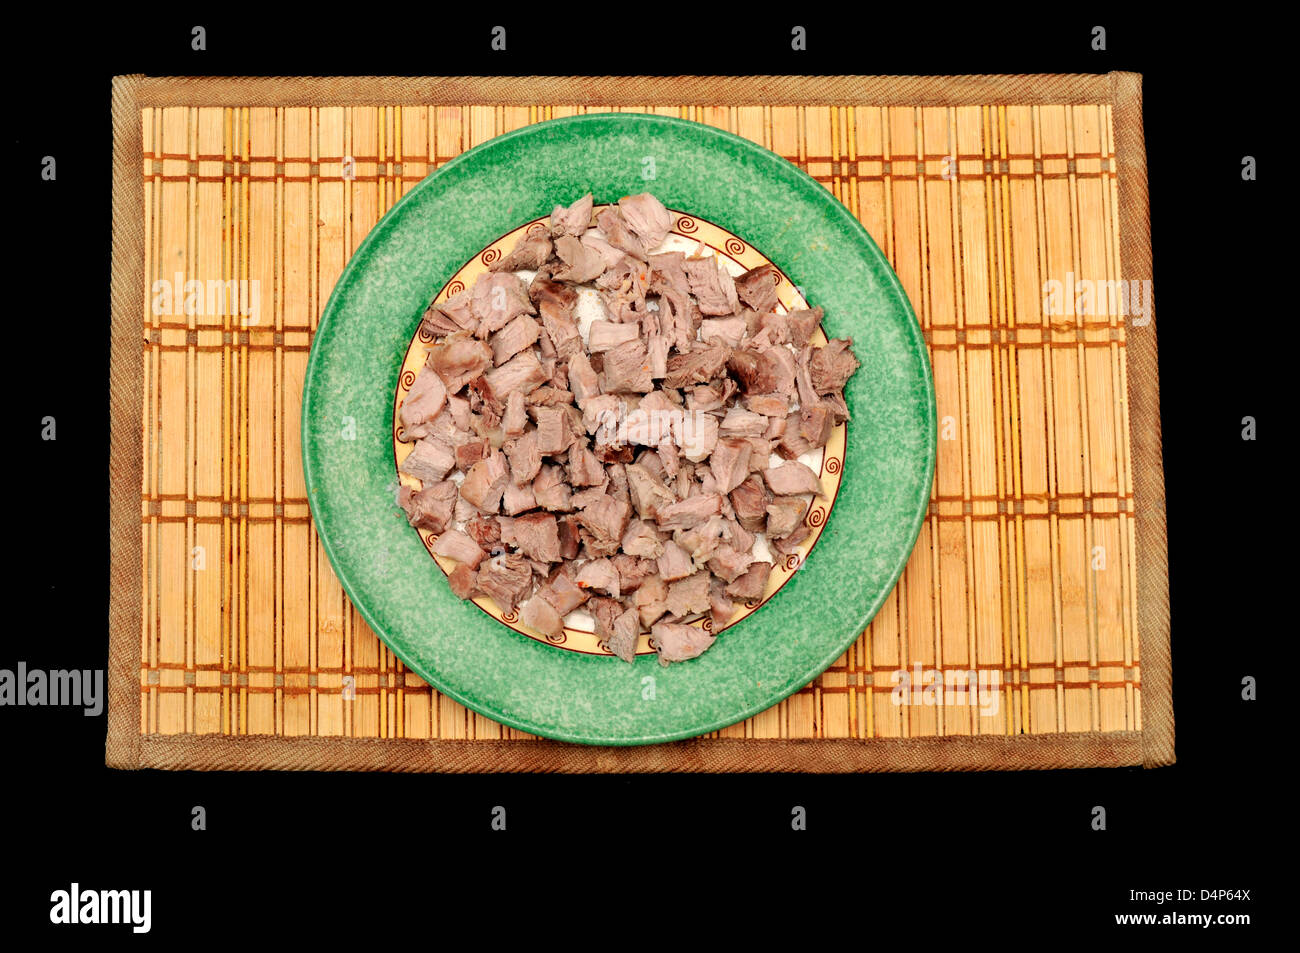 Plate with pieces of boiled meat Stock Photo